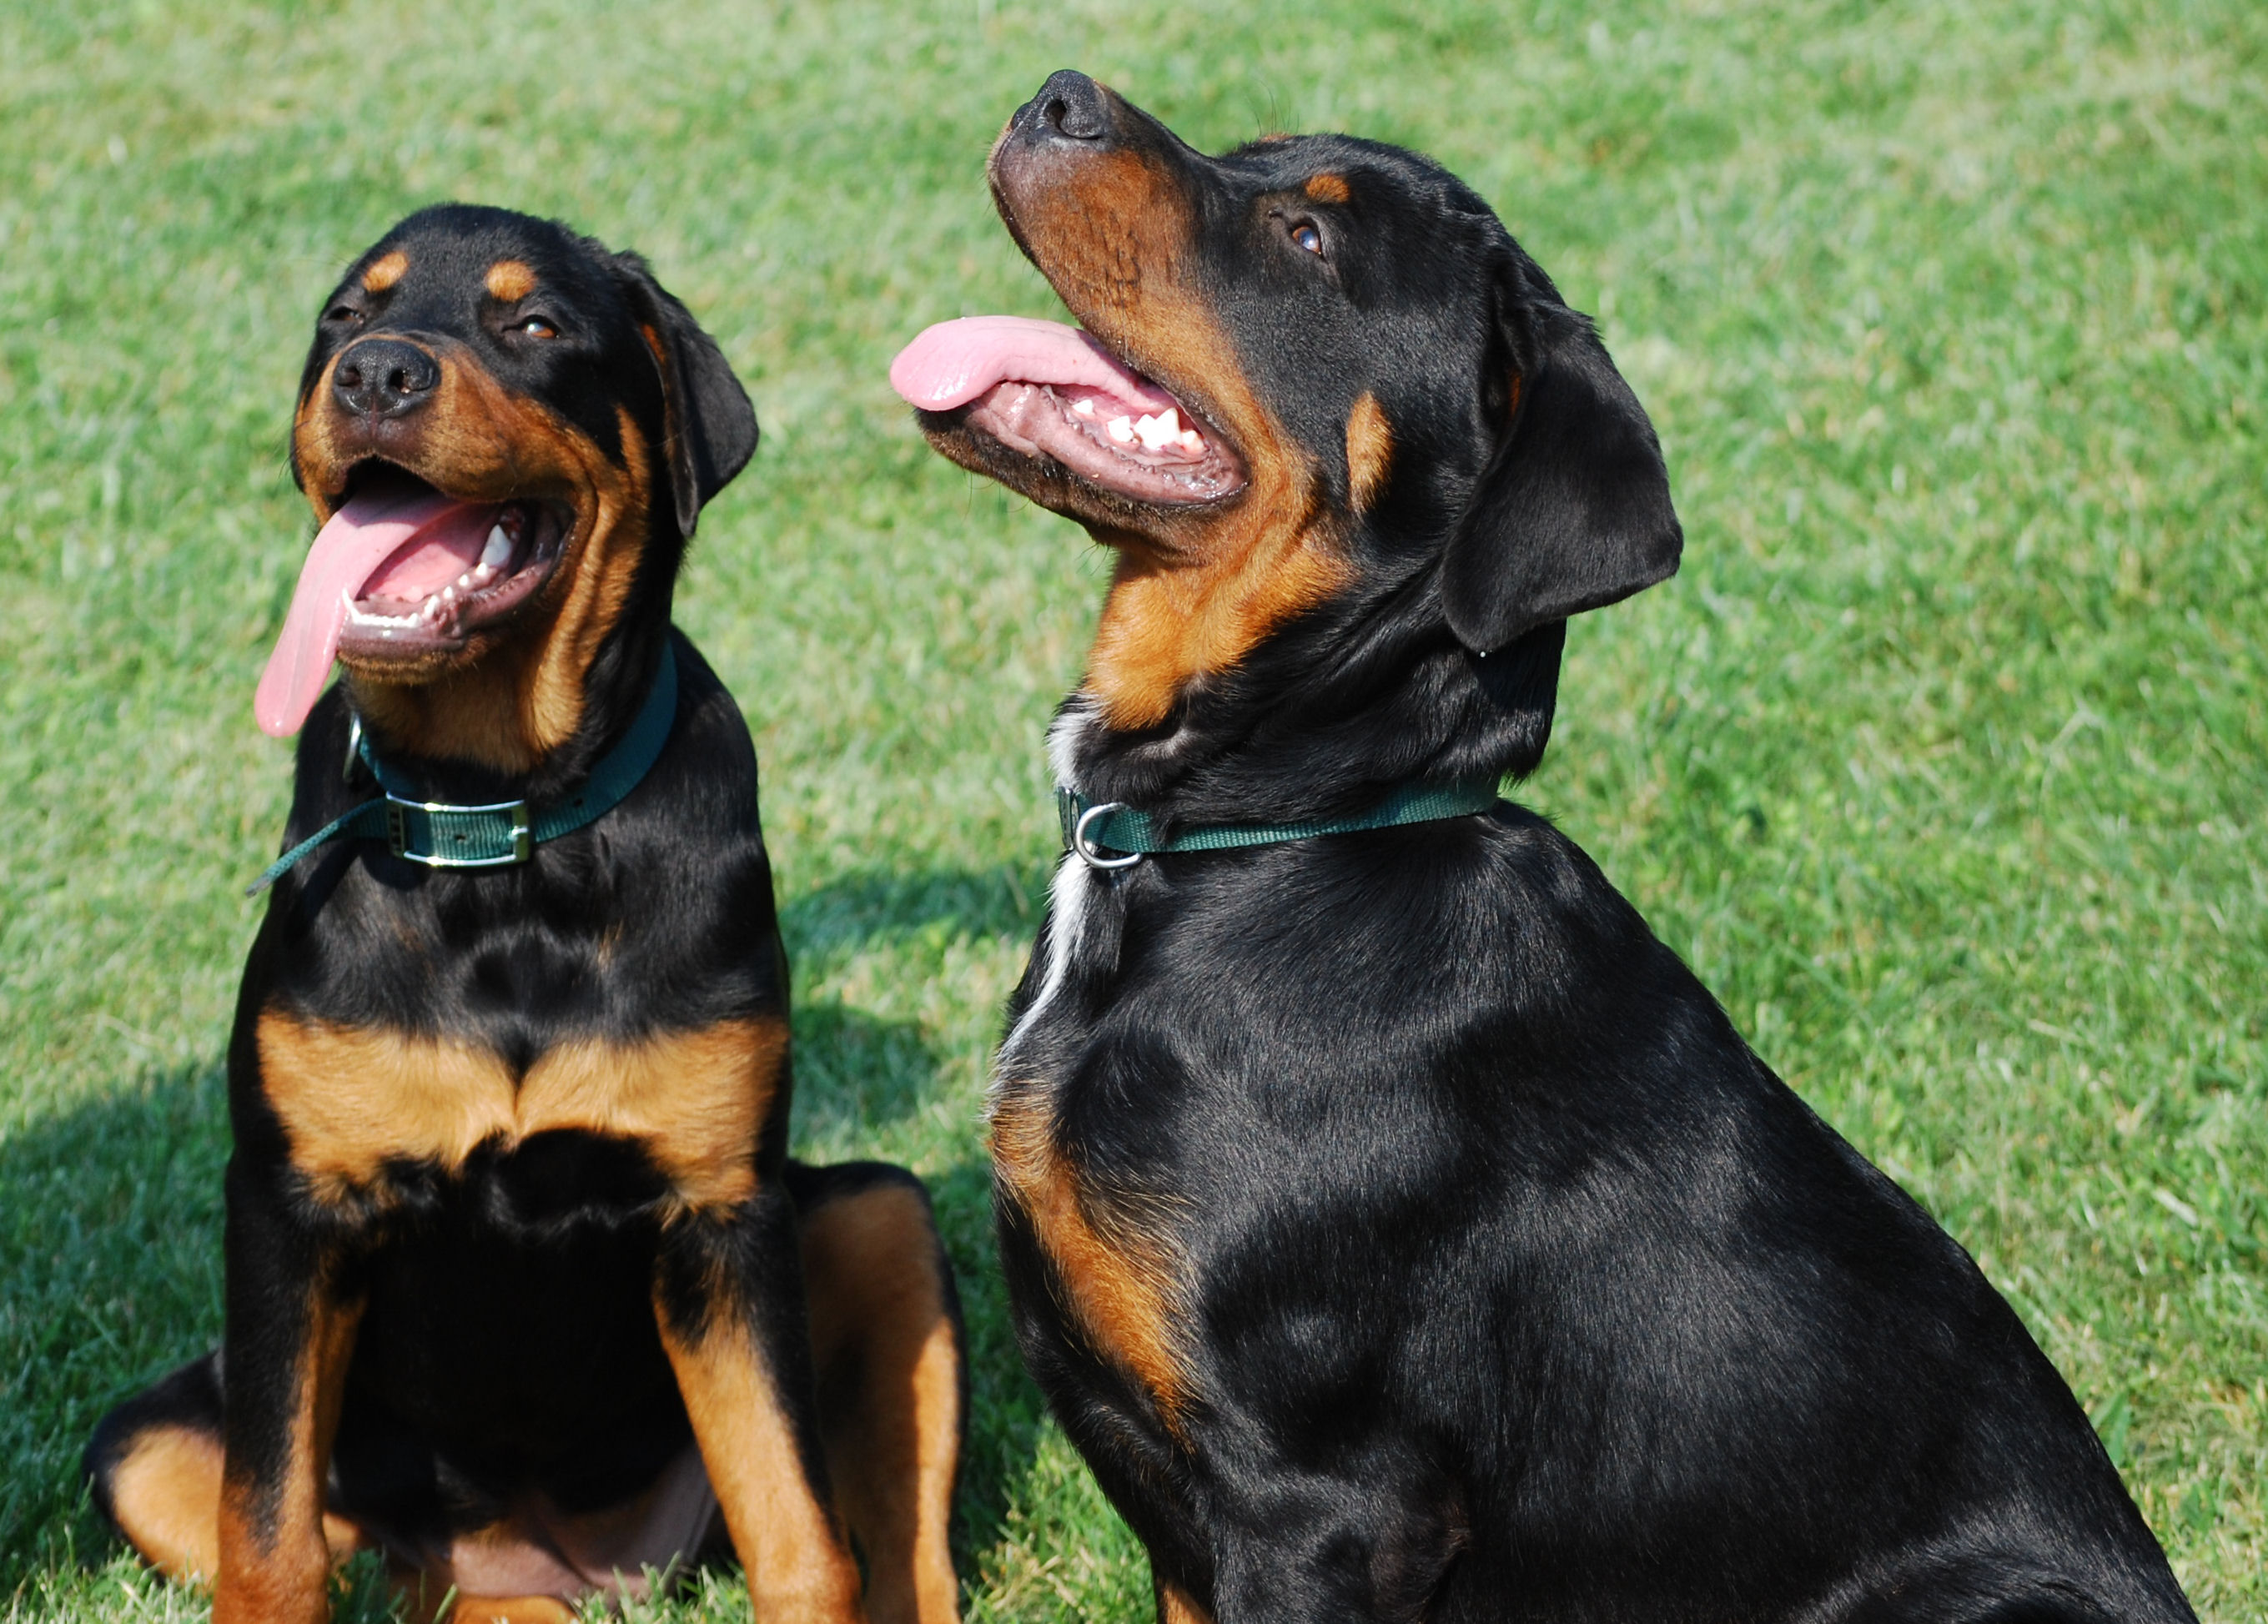 Two Rottweiler dogs wallpaper